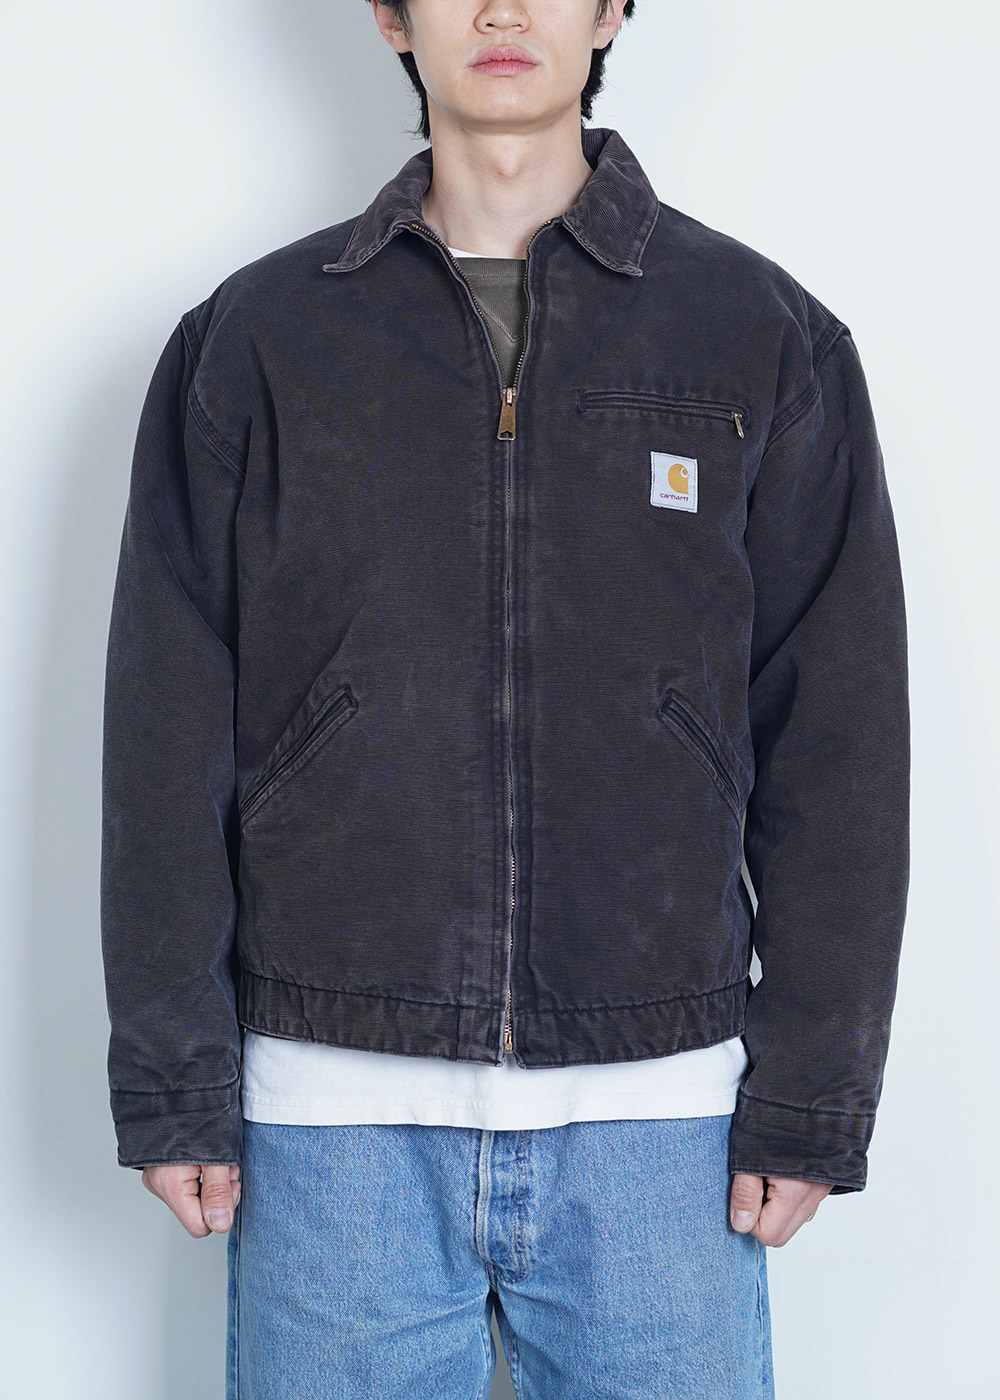 reproduction 042 / carhartt (Overdyed)